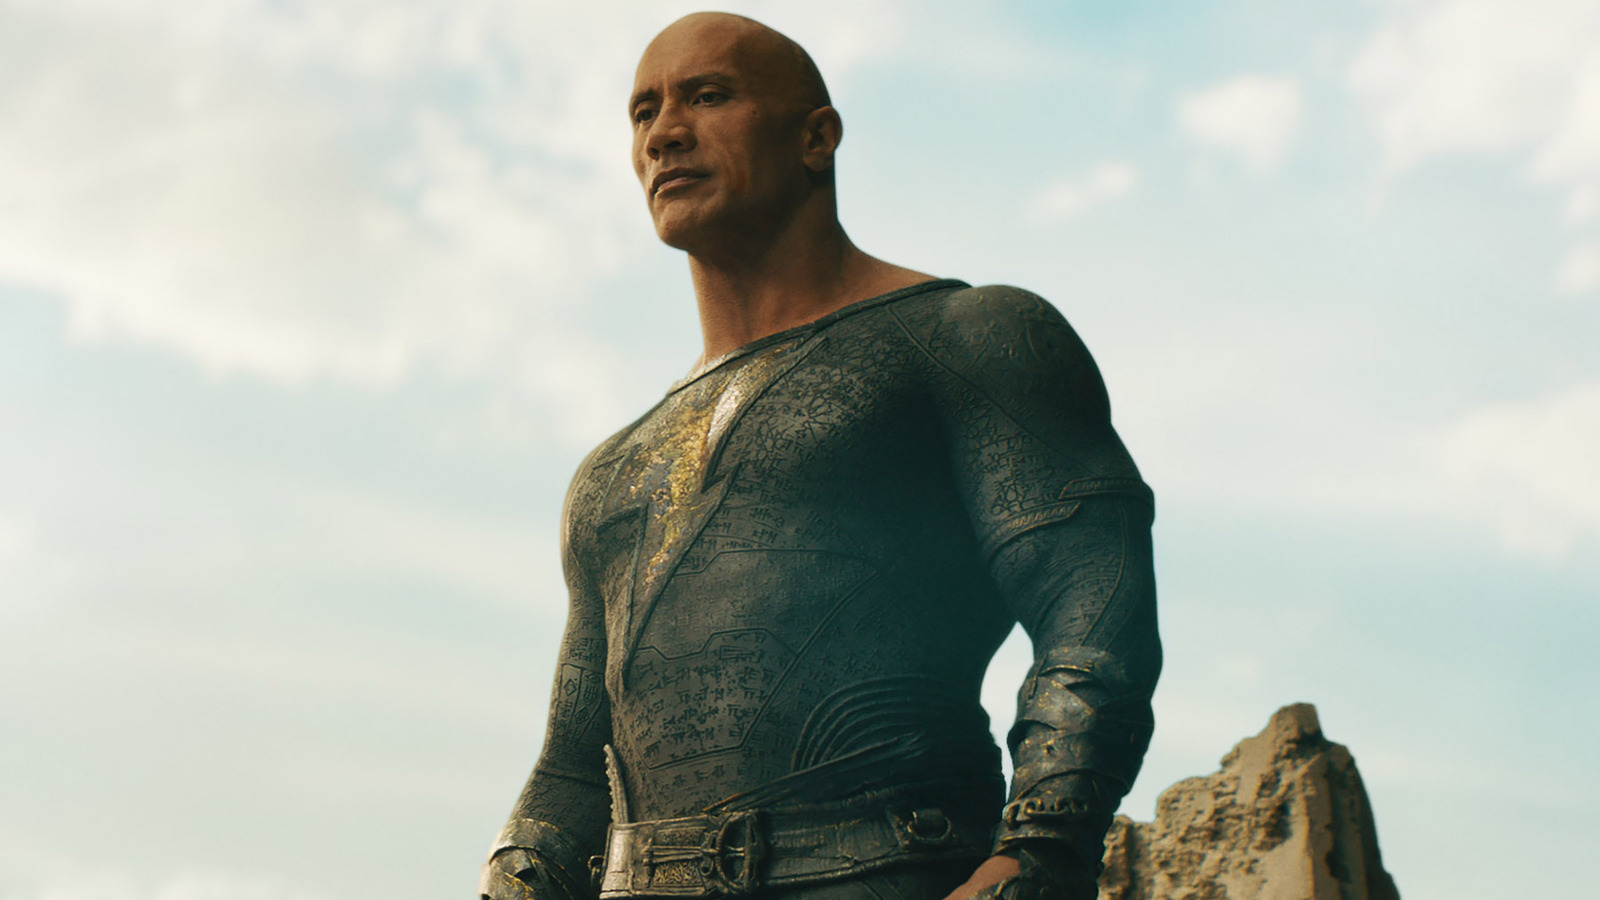 It Takes Two' Movie Boarded by Dwayne Johnson's Production Company